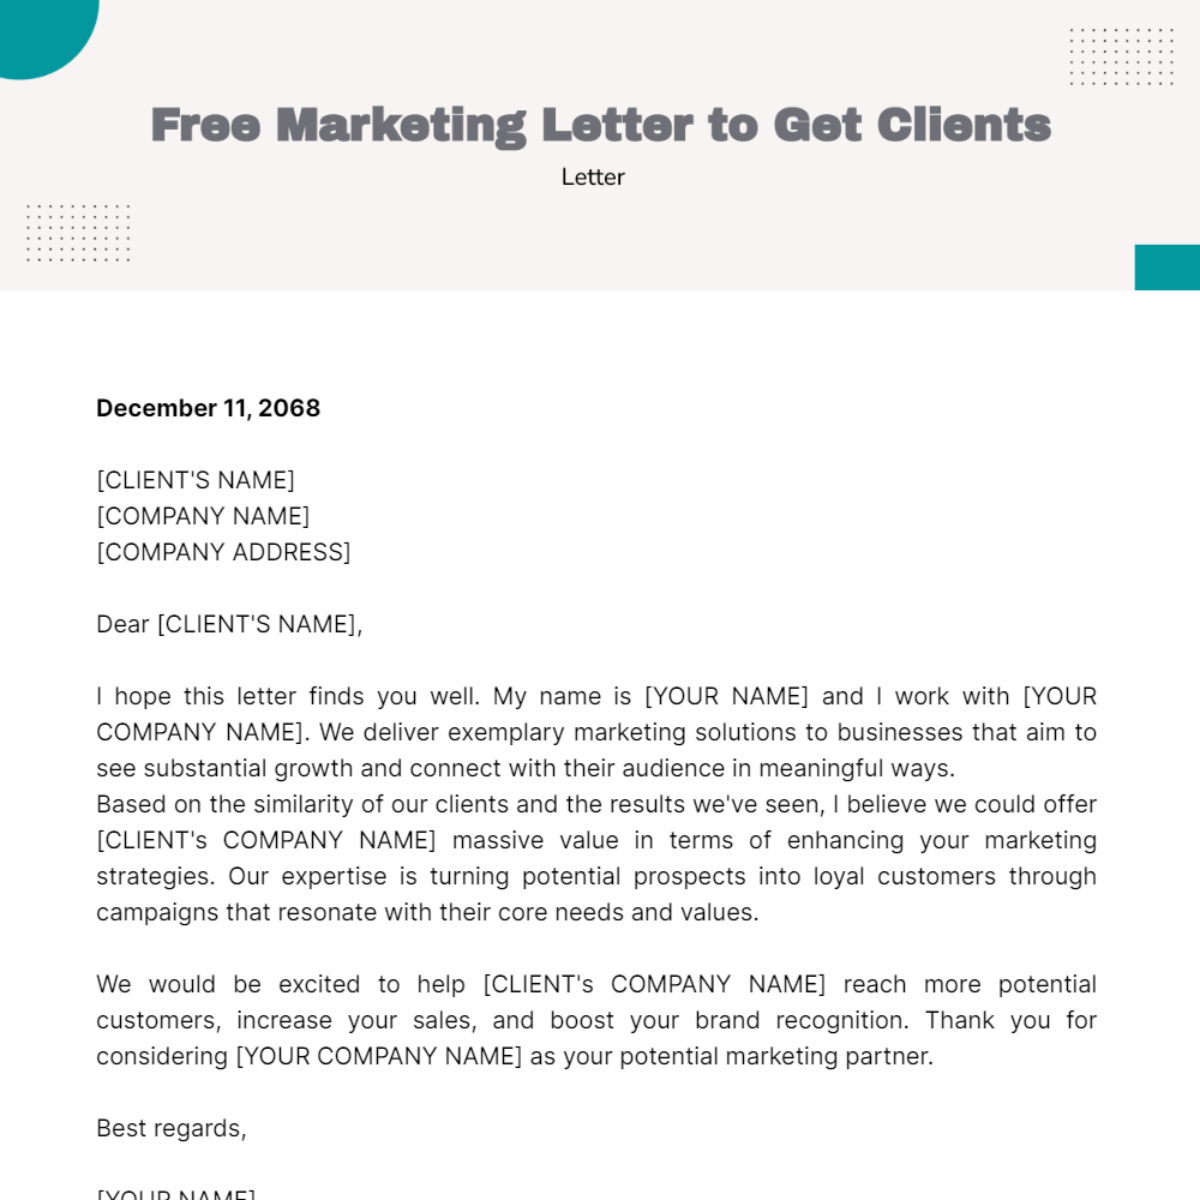 Marketing Letter to Get Clients Template